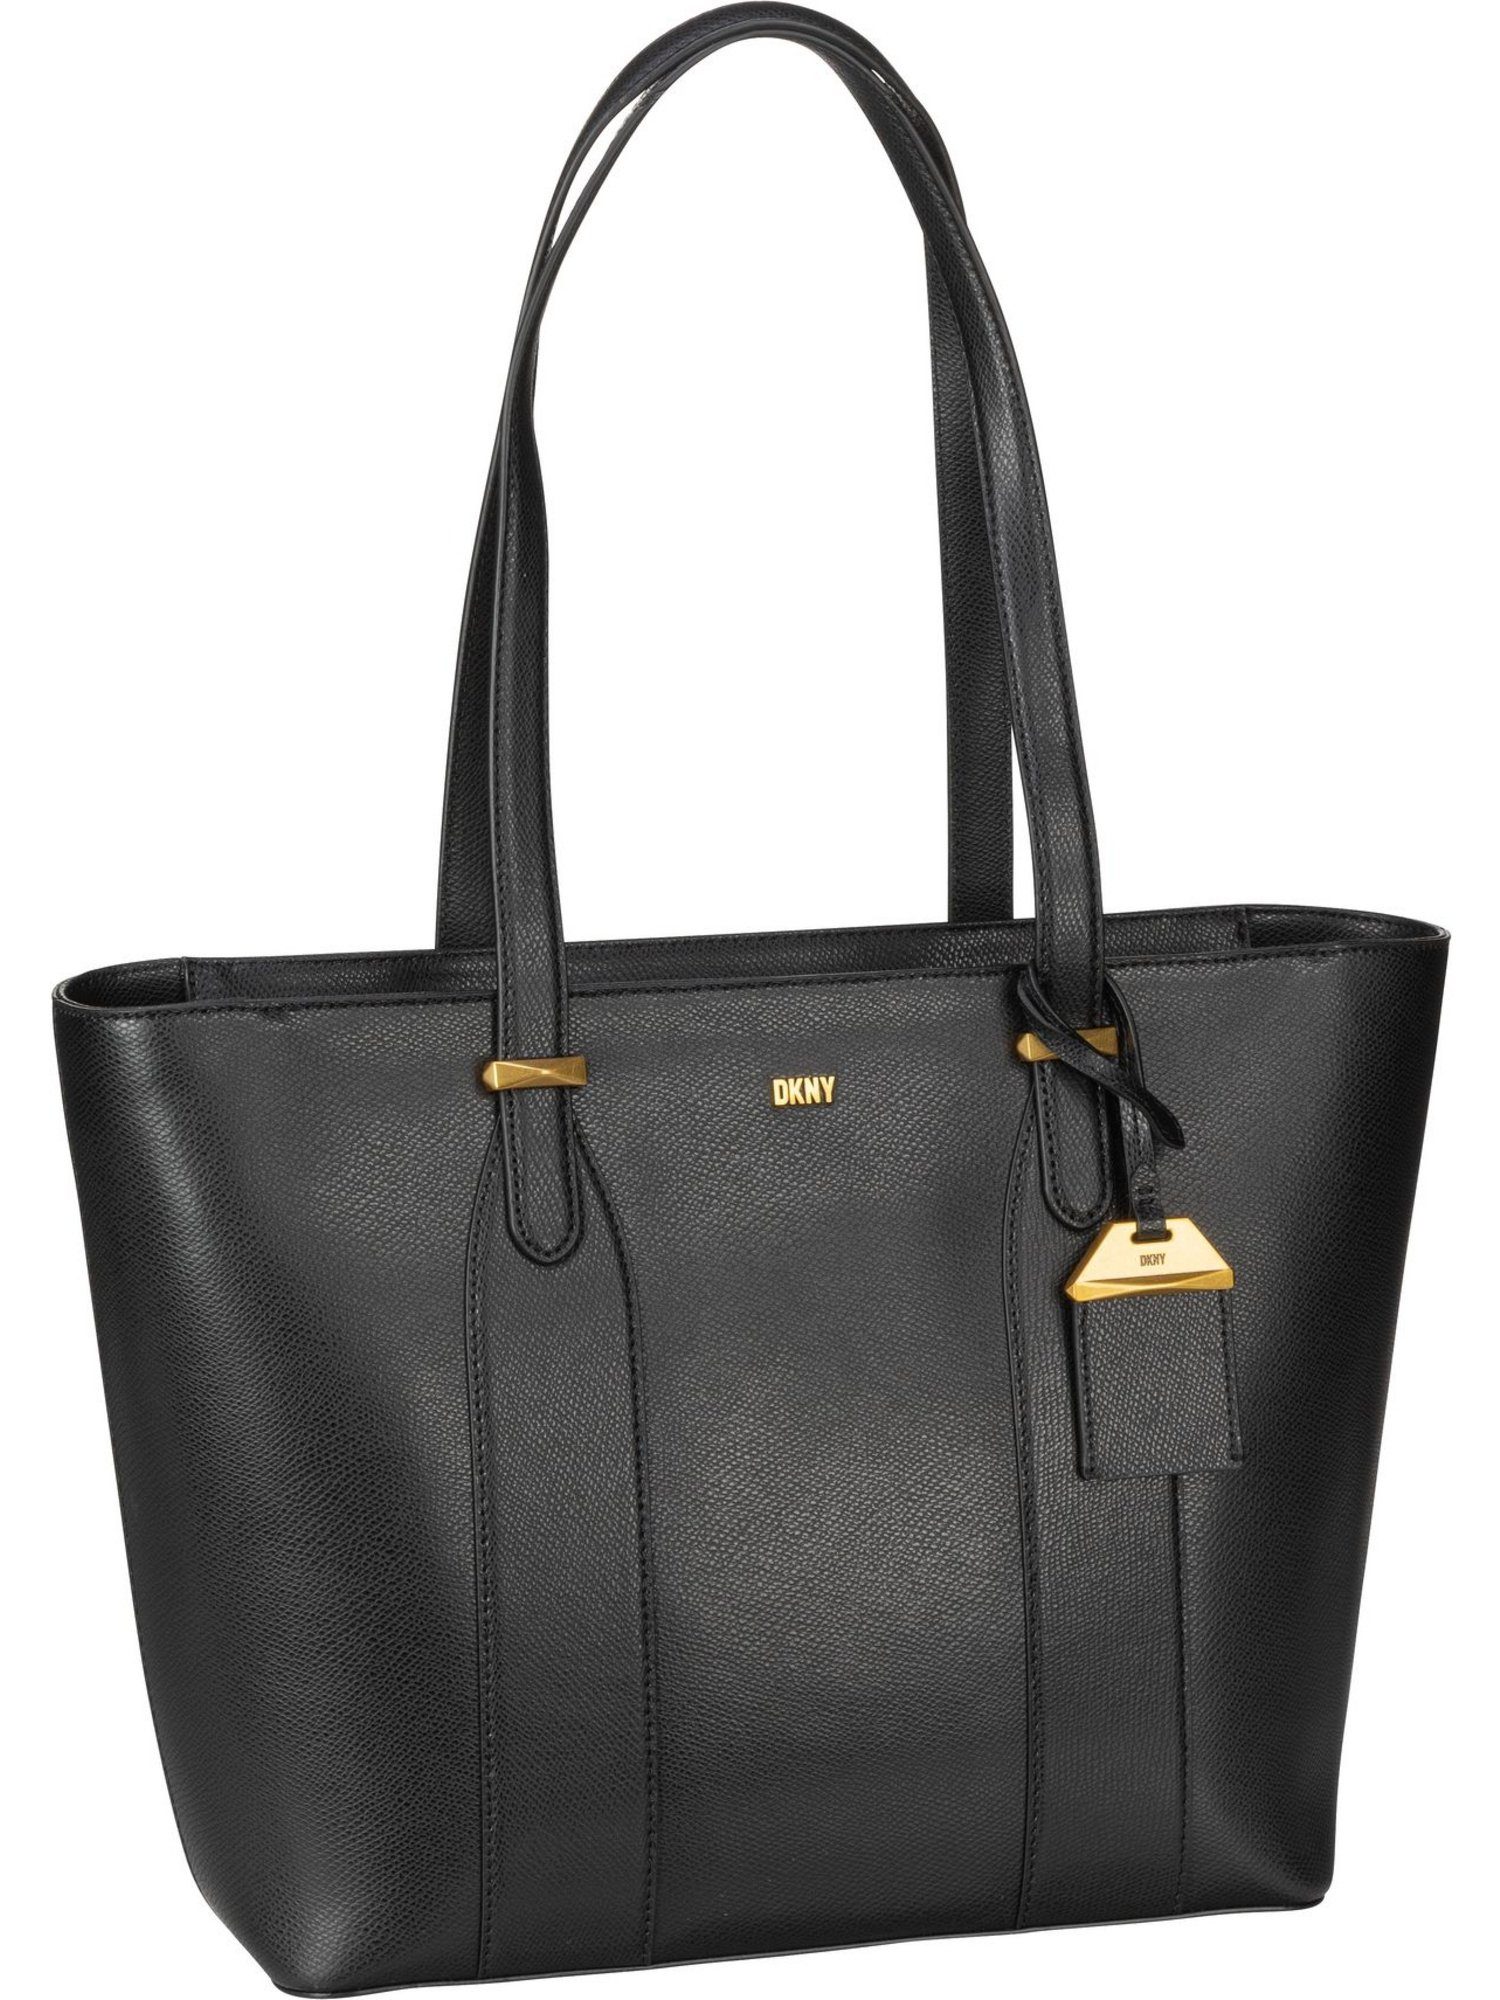 DKNY Shopper Marykate Dundee Leather Tote